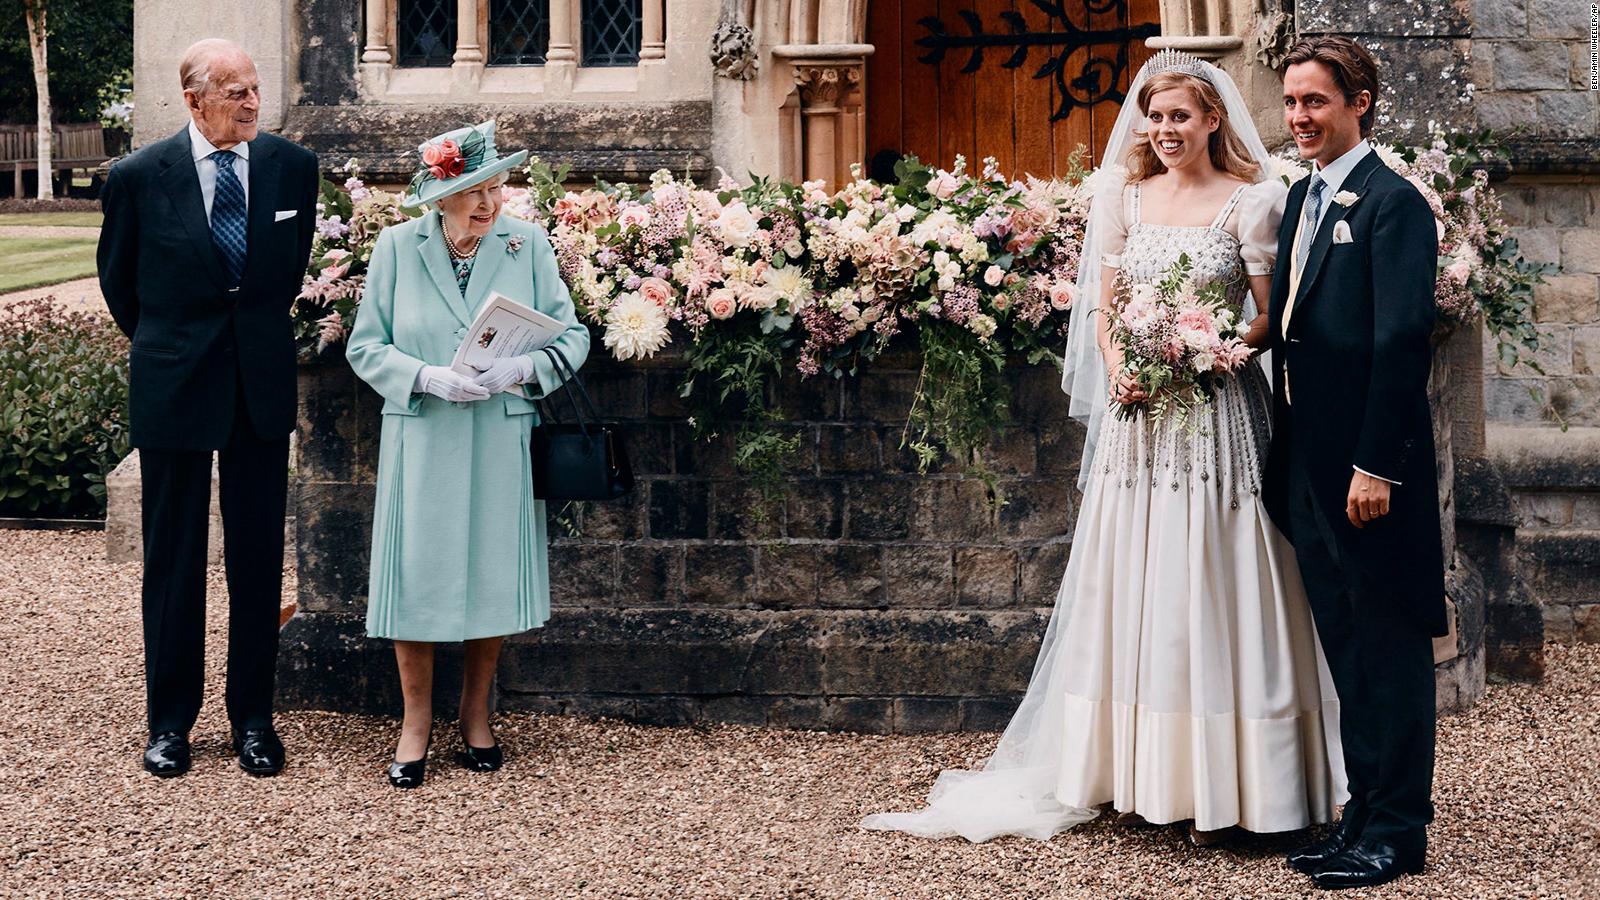 Princess Beatrice Daughter Of Prince Andrew Releases Photos Of Her